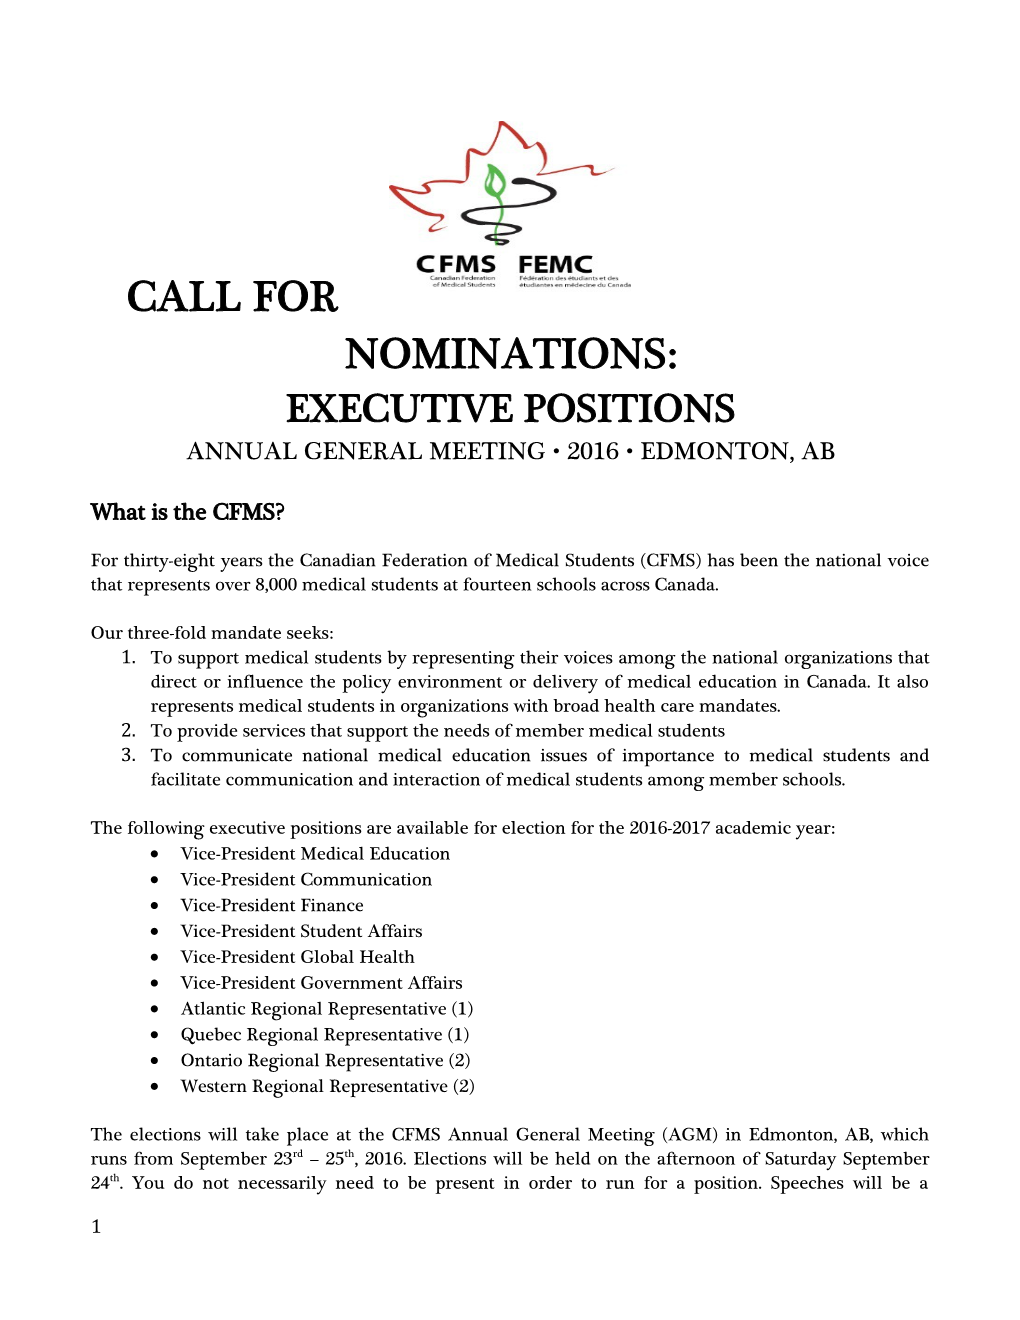 Call for Nominations s3